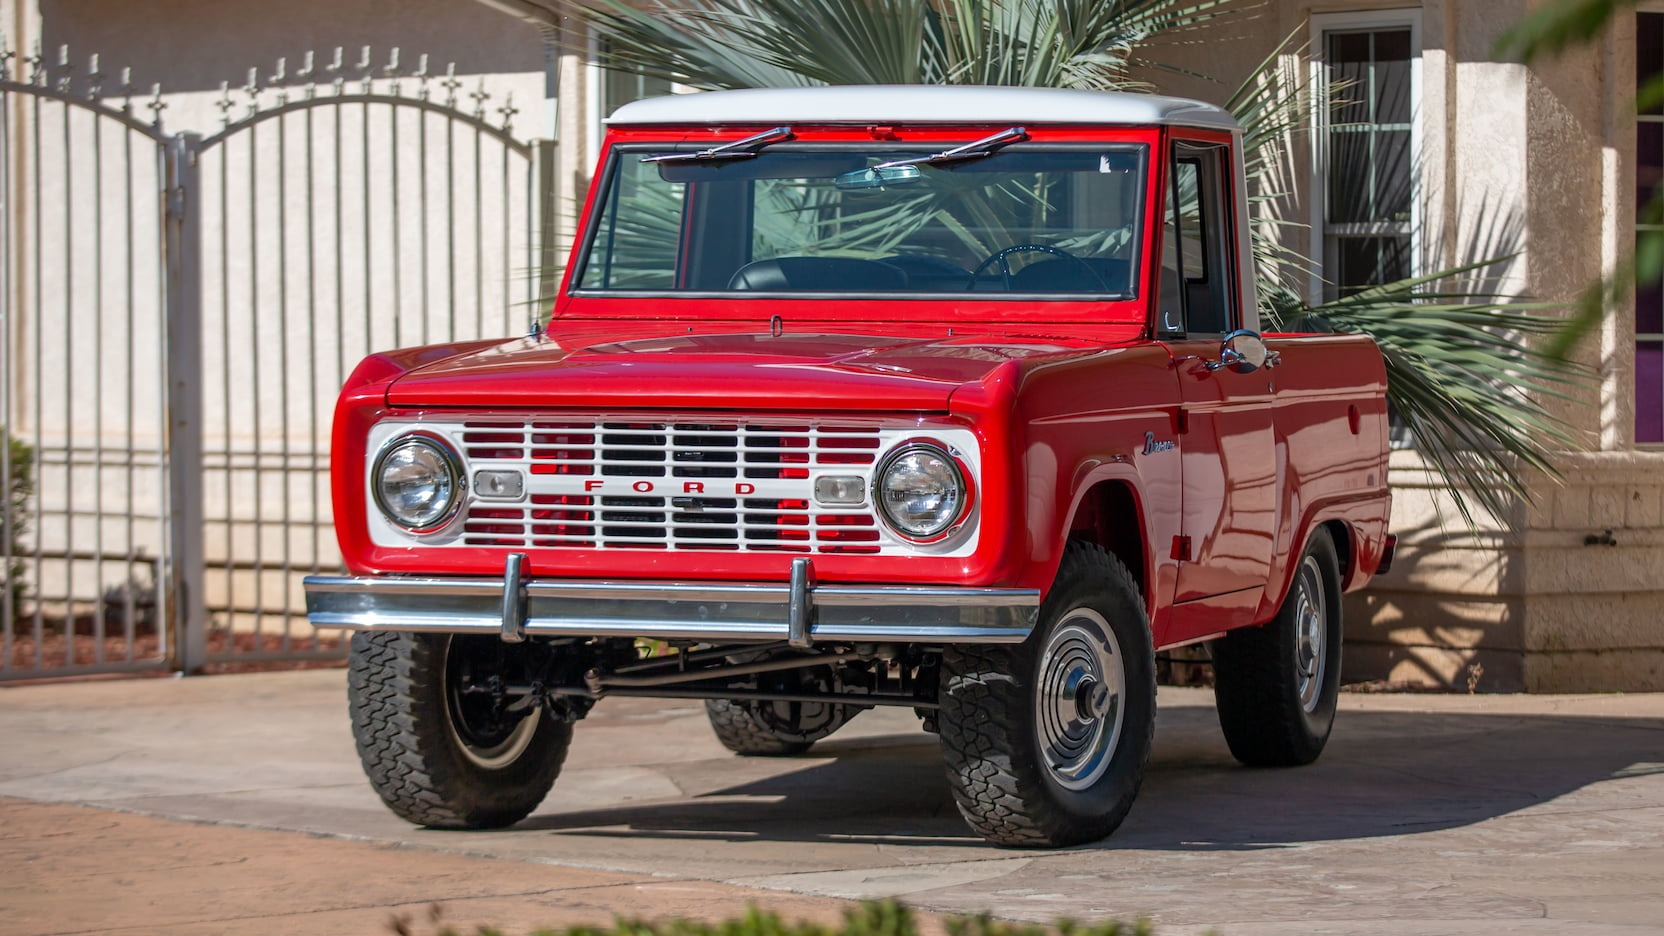 Ford Bronco HERITAGE EDITION Bronco Spied! Riding on 35's, Classic 4-Slot Wheel Design and White Grille! 1612291410705